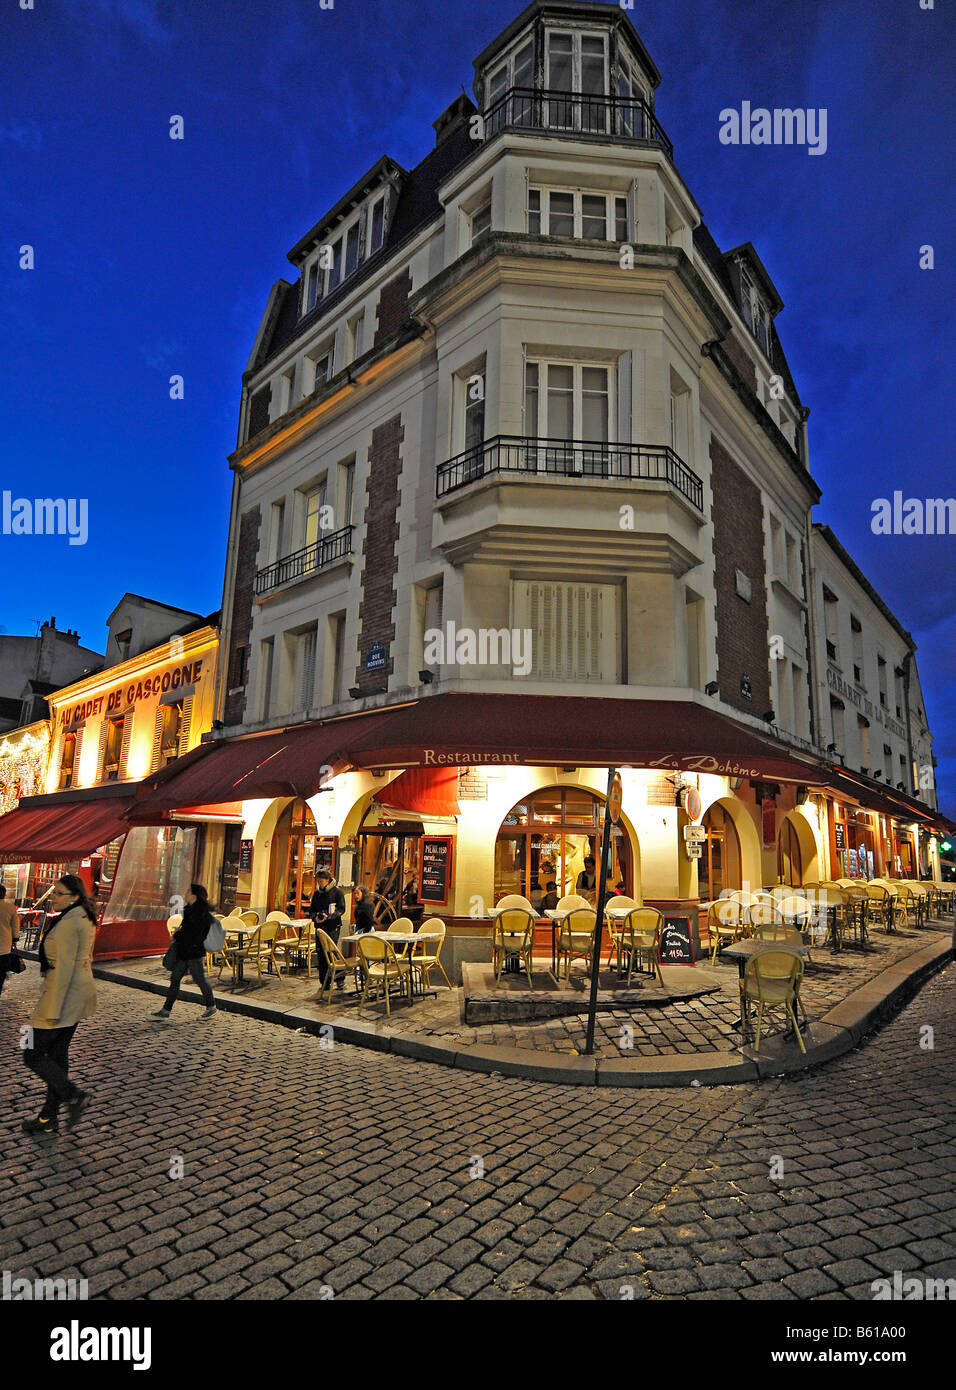 Picture taken at night, restaurant in the Montmartre district, Paris, France, Europe Stock Photo